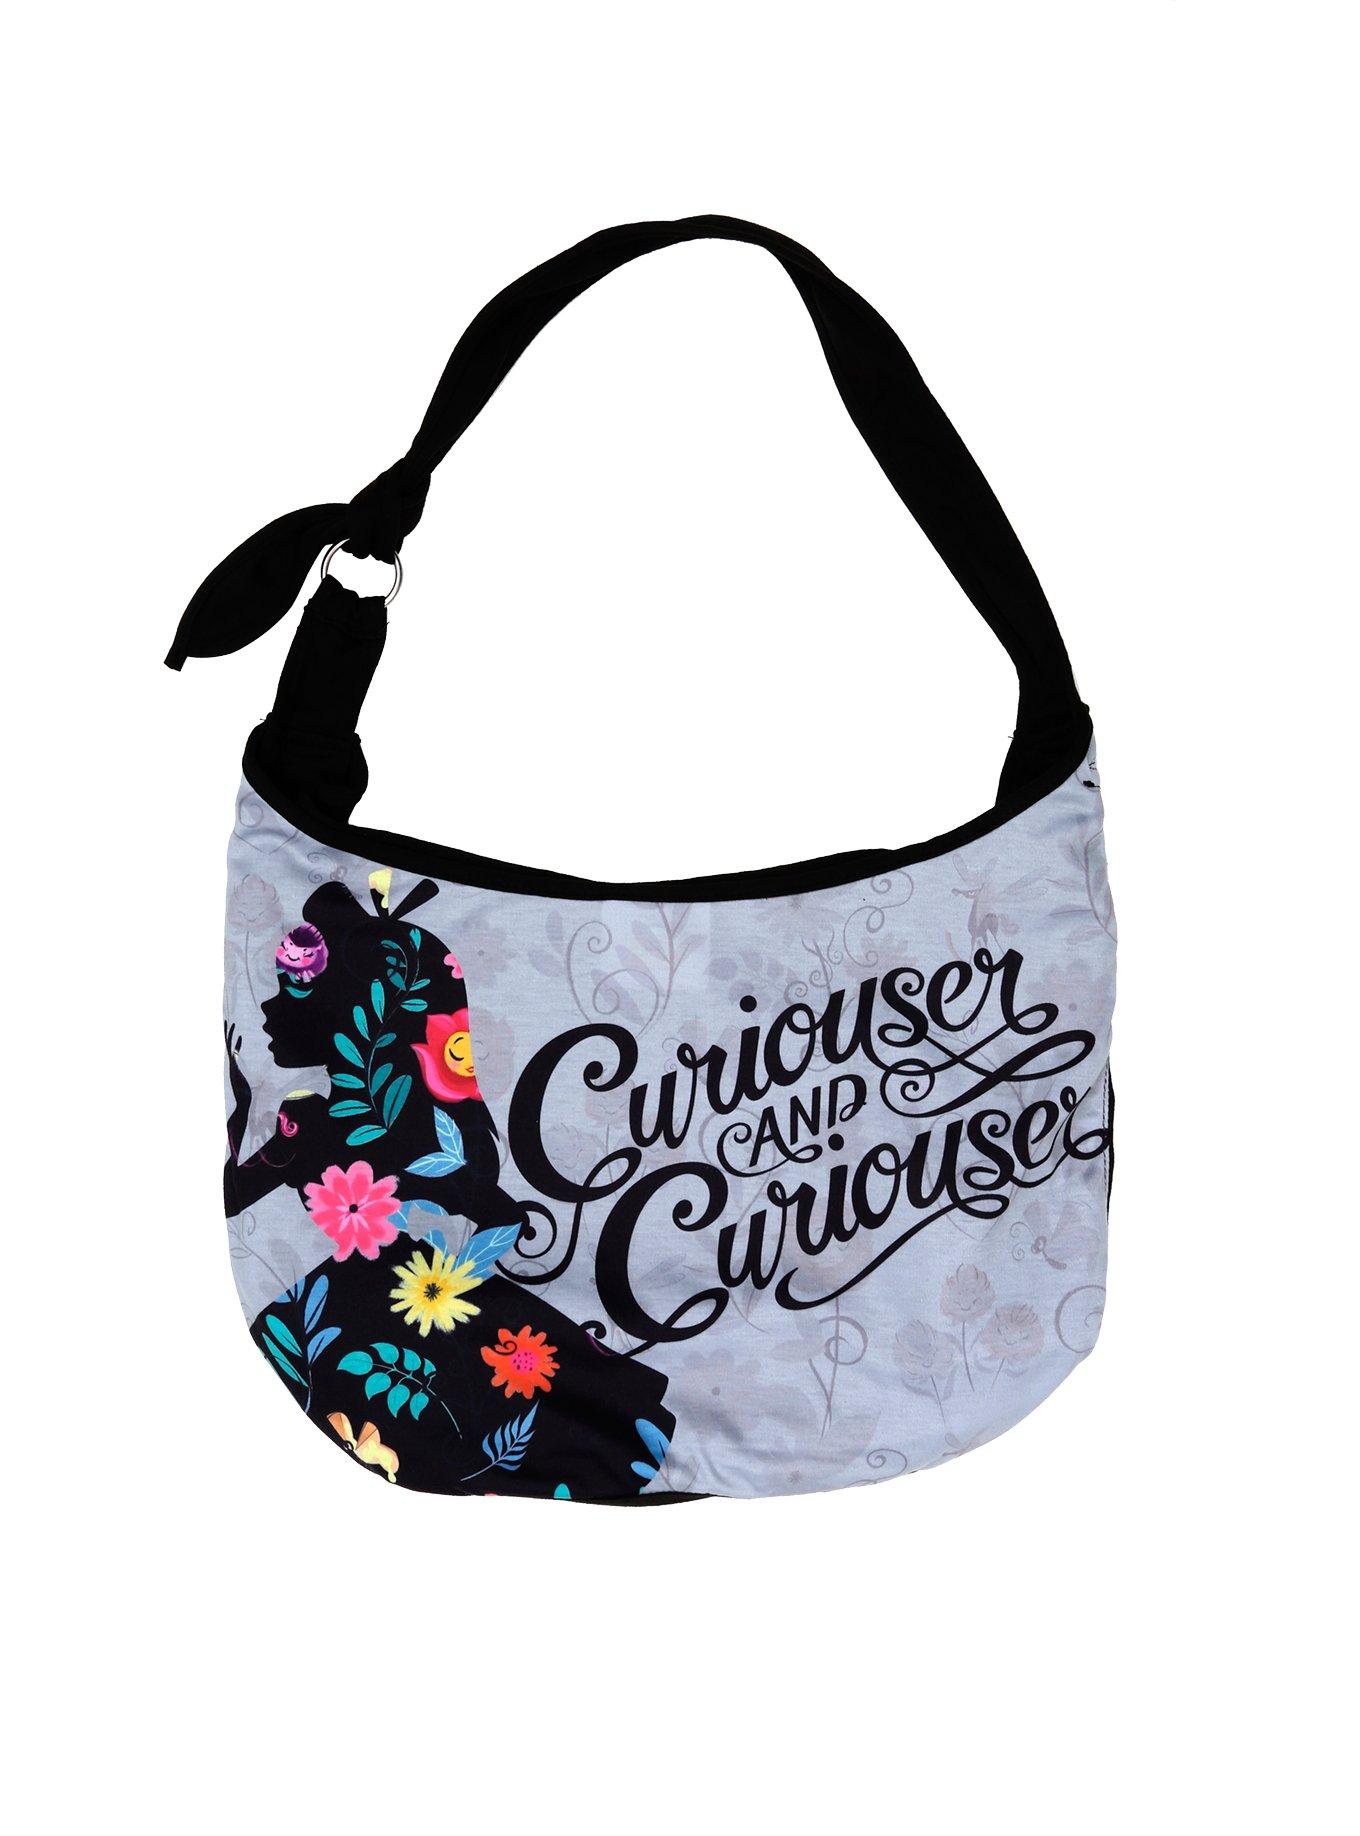 DisneyAliceinWonderland Collection The perfect bag for the curious